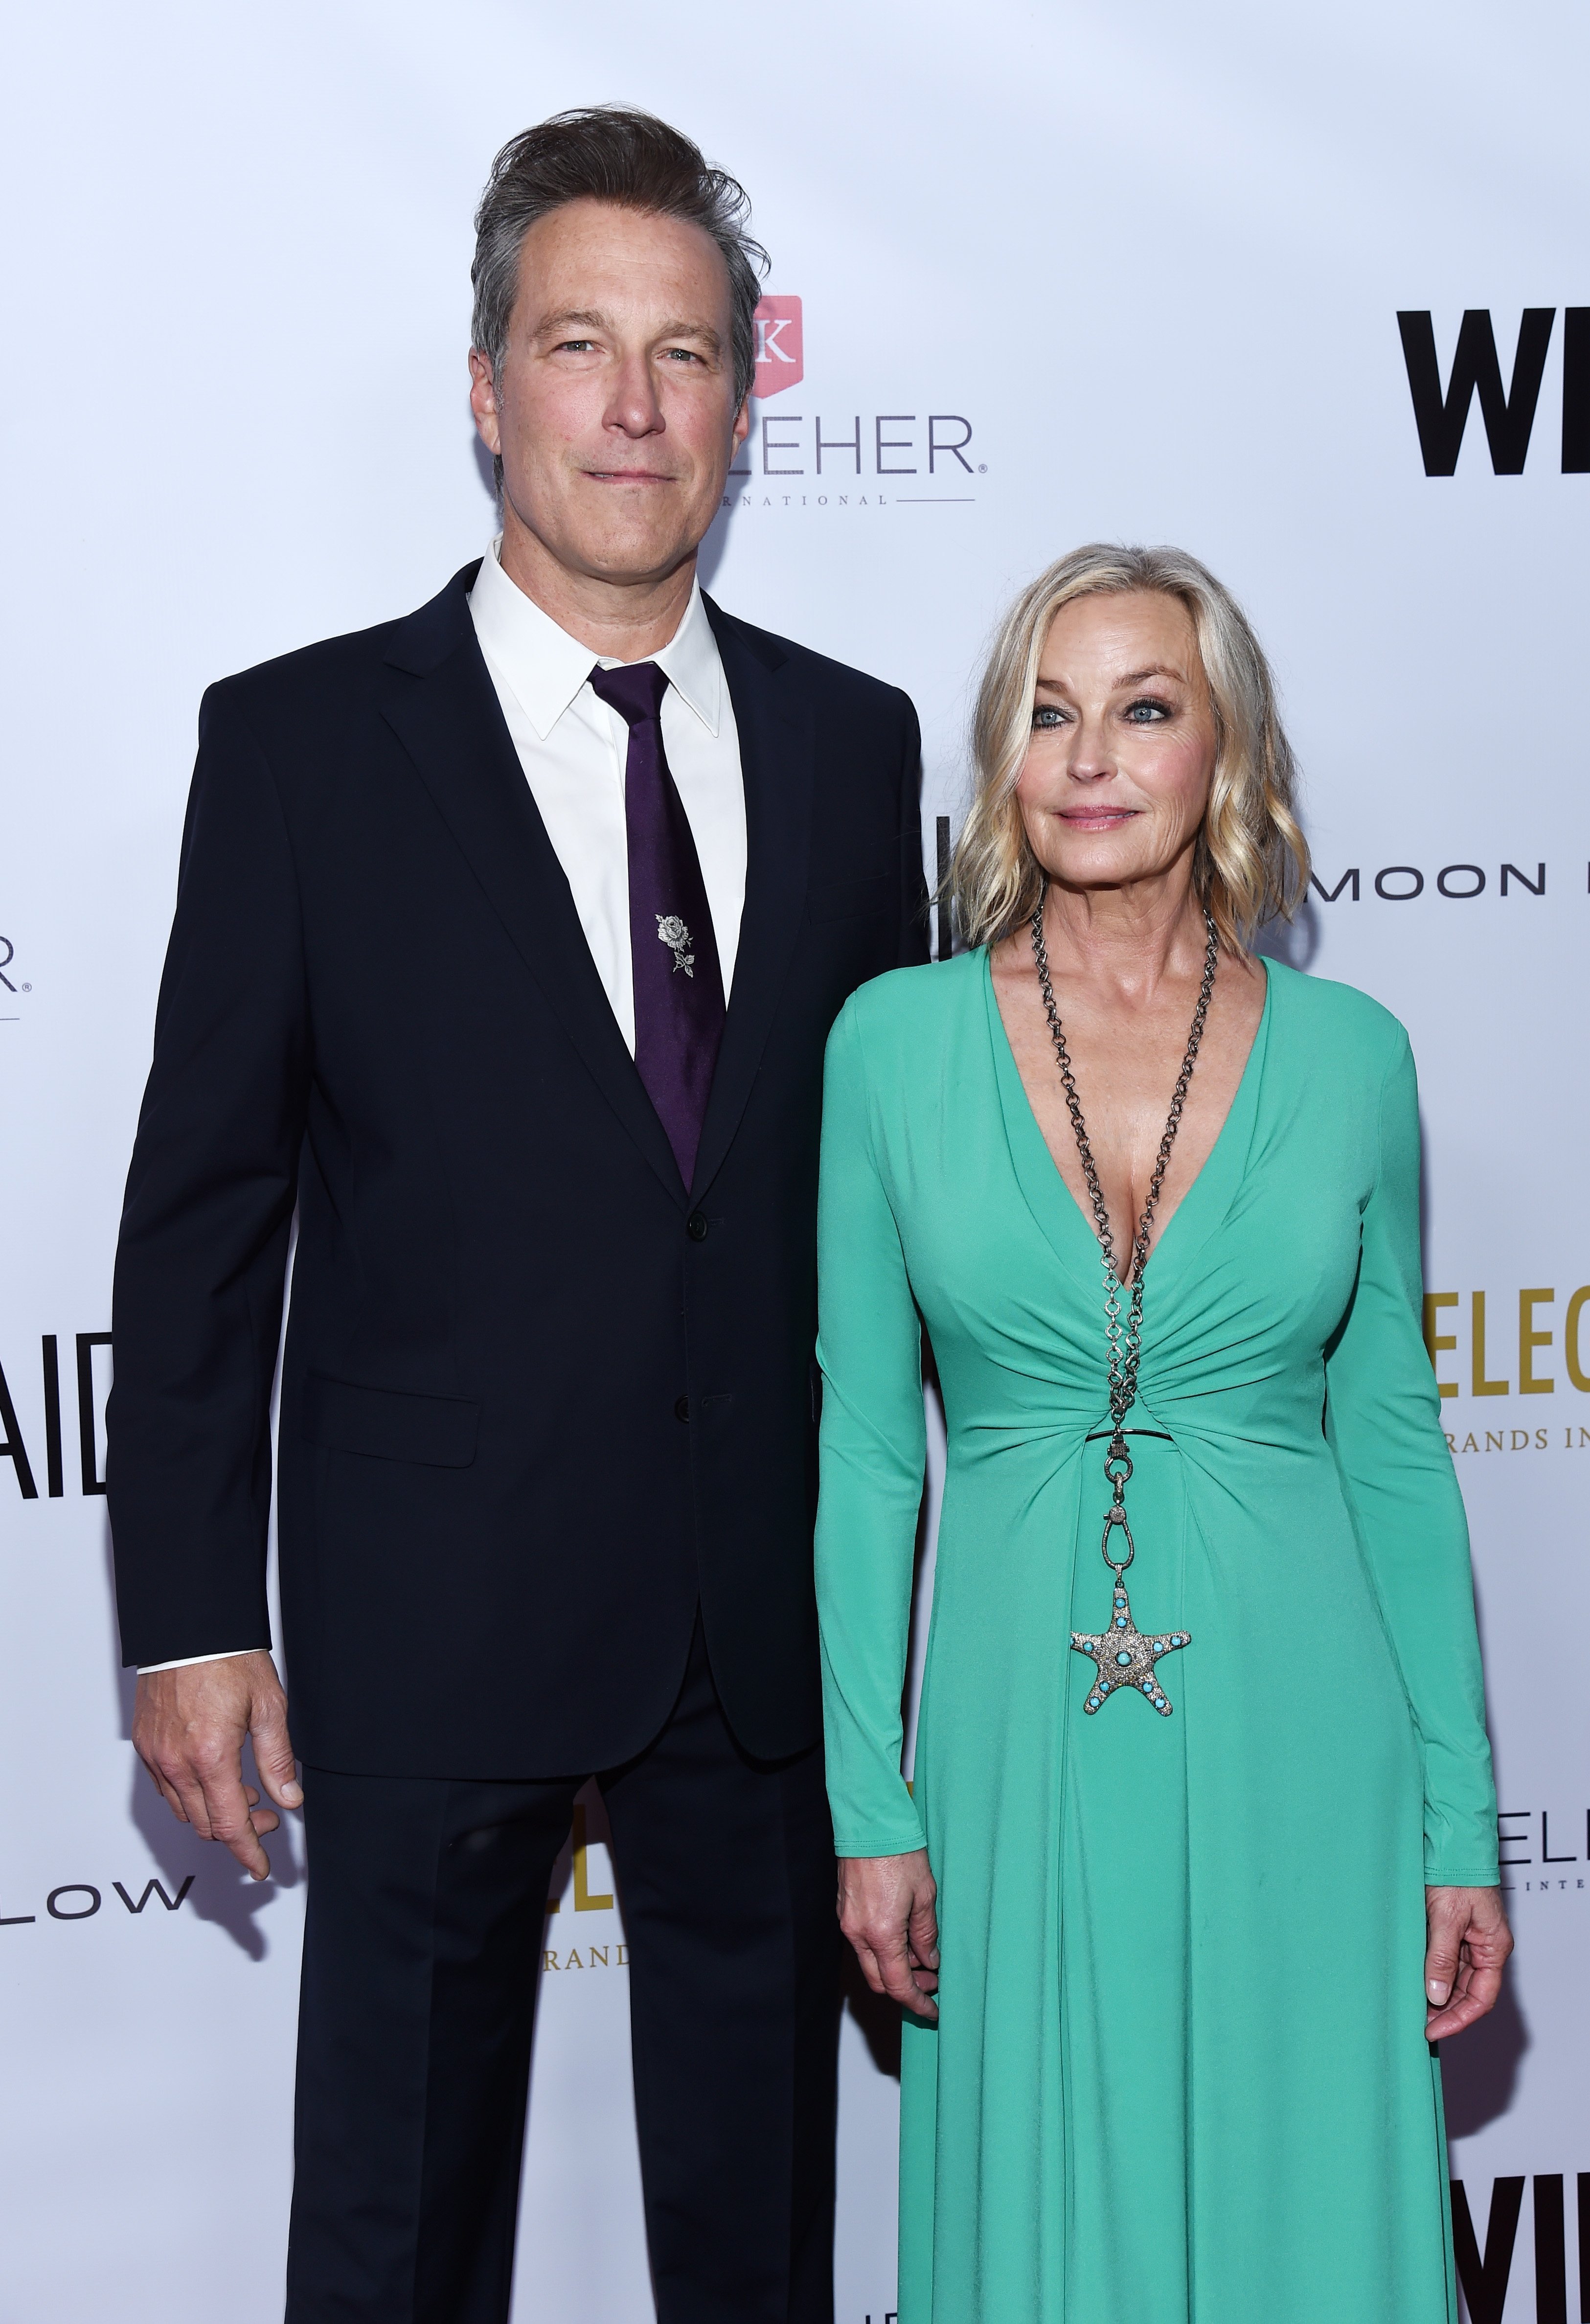 John Corbett and Bo Derek arrive at the 2019 WildAid Gala at the Beverly Wilshire Four Seasons Hotel on November 09, 2019 in Beverly Hills, California | Source: Getty Images